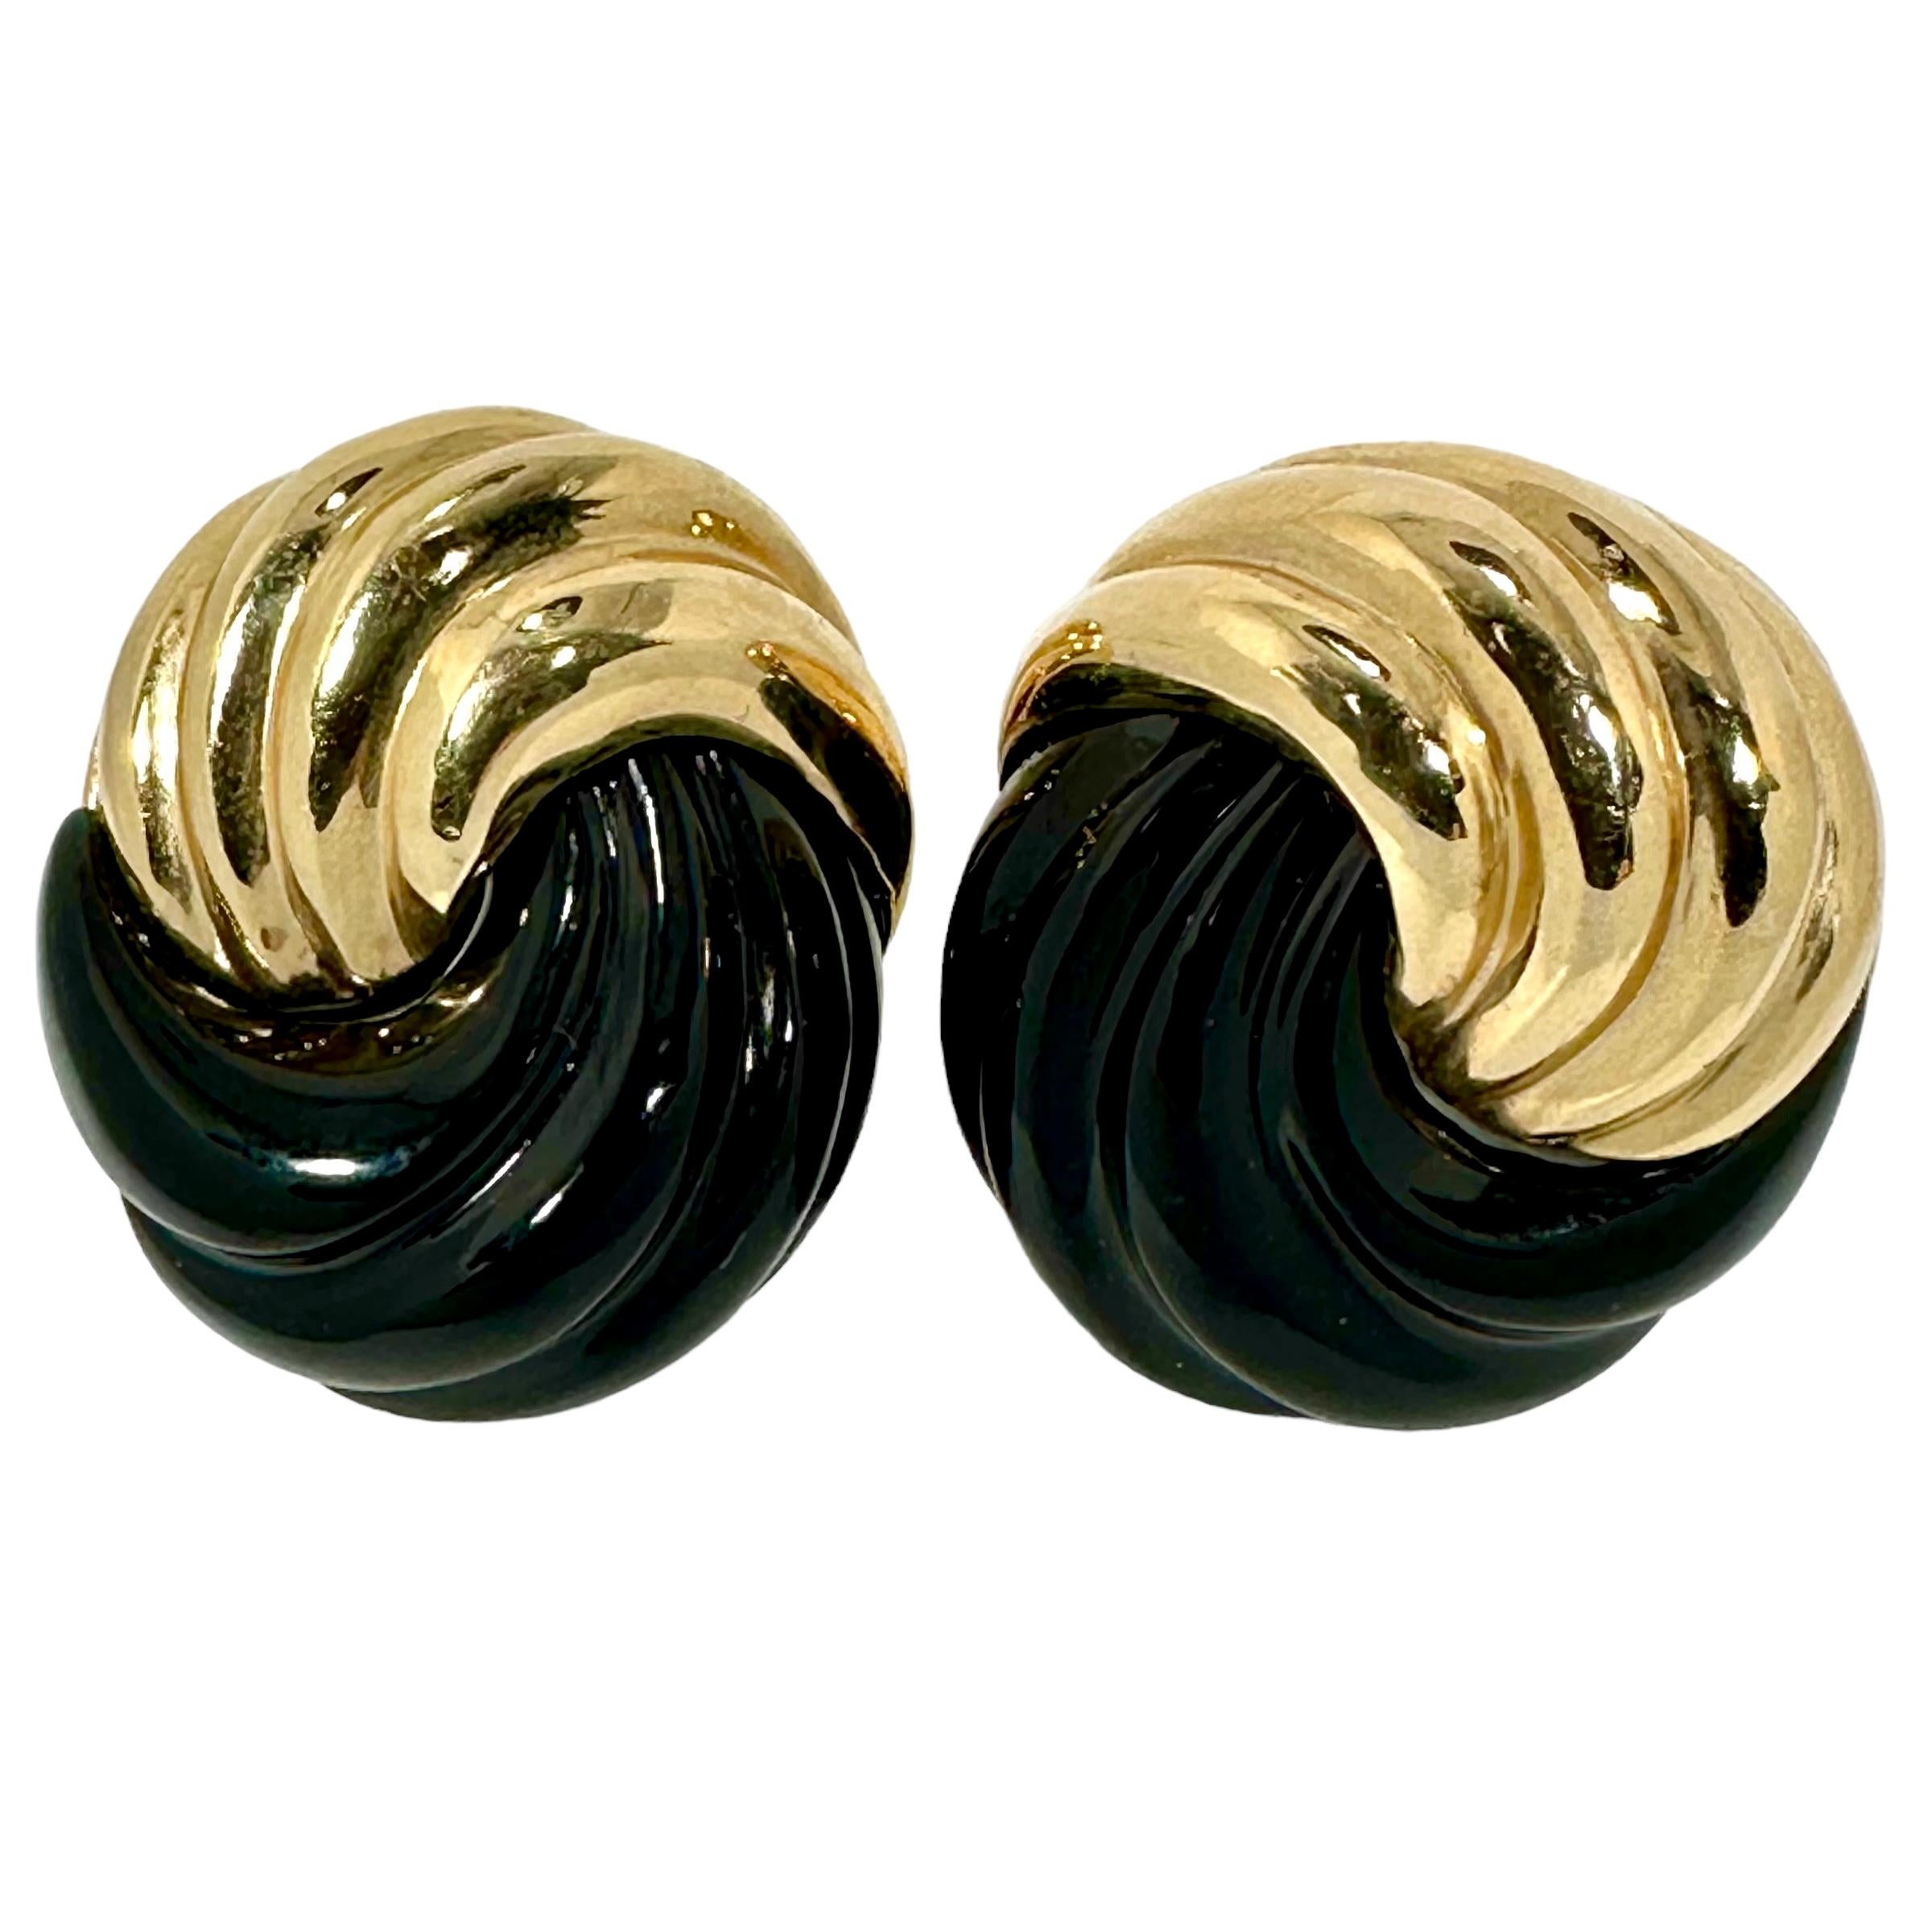 This visually exciting pair of vintage MAZ designer clip on earrings, created from fluted, 14k yellow gold and fluted, black onyx are crafted in the manner of a very dimensional knot.  With a measure of 1 1/8 inches in height by 1 inch in width,